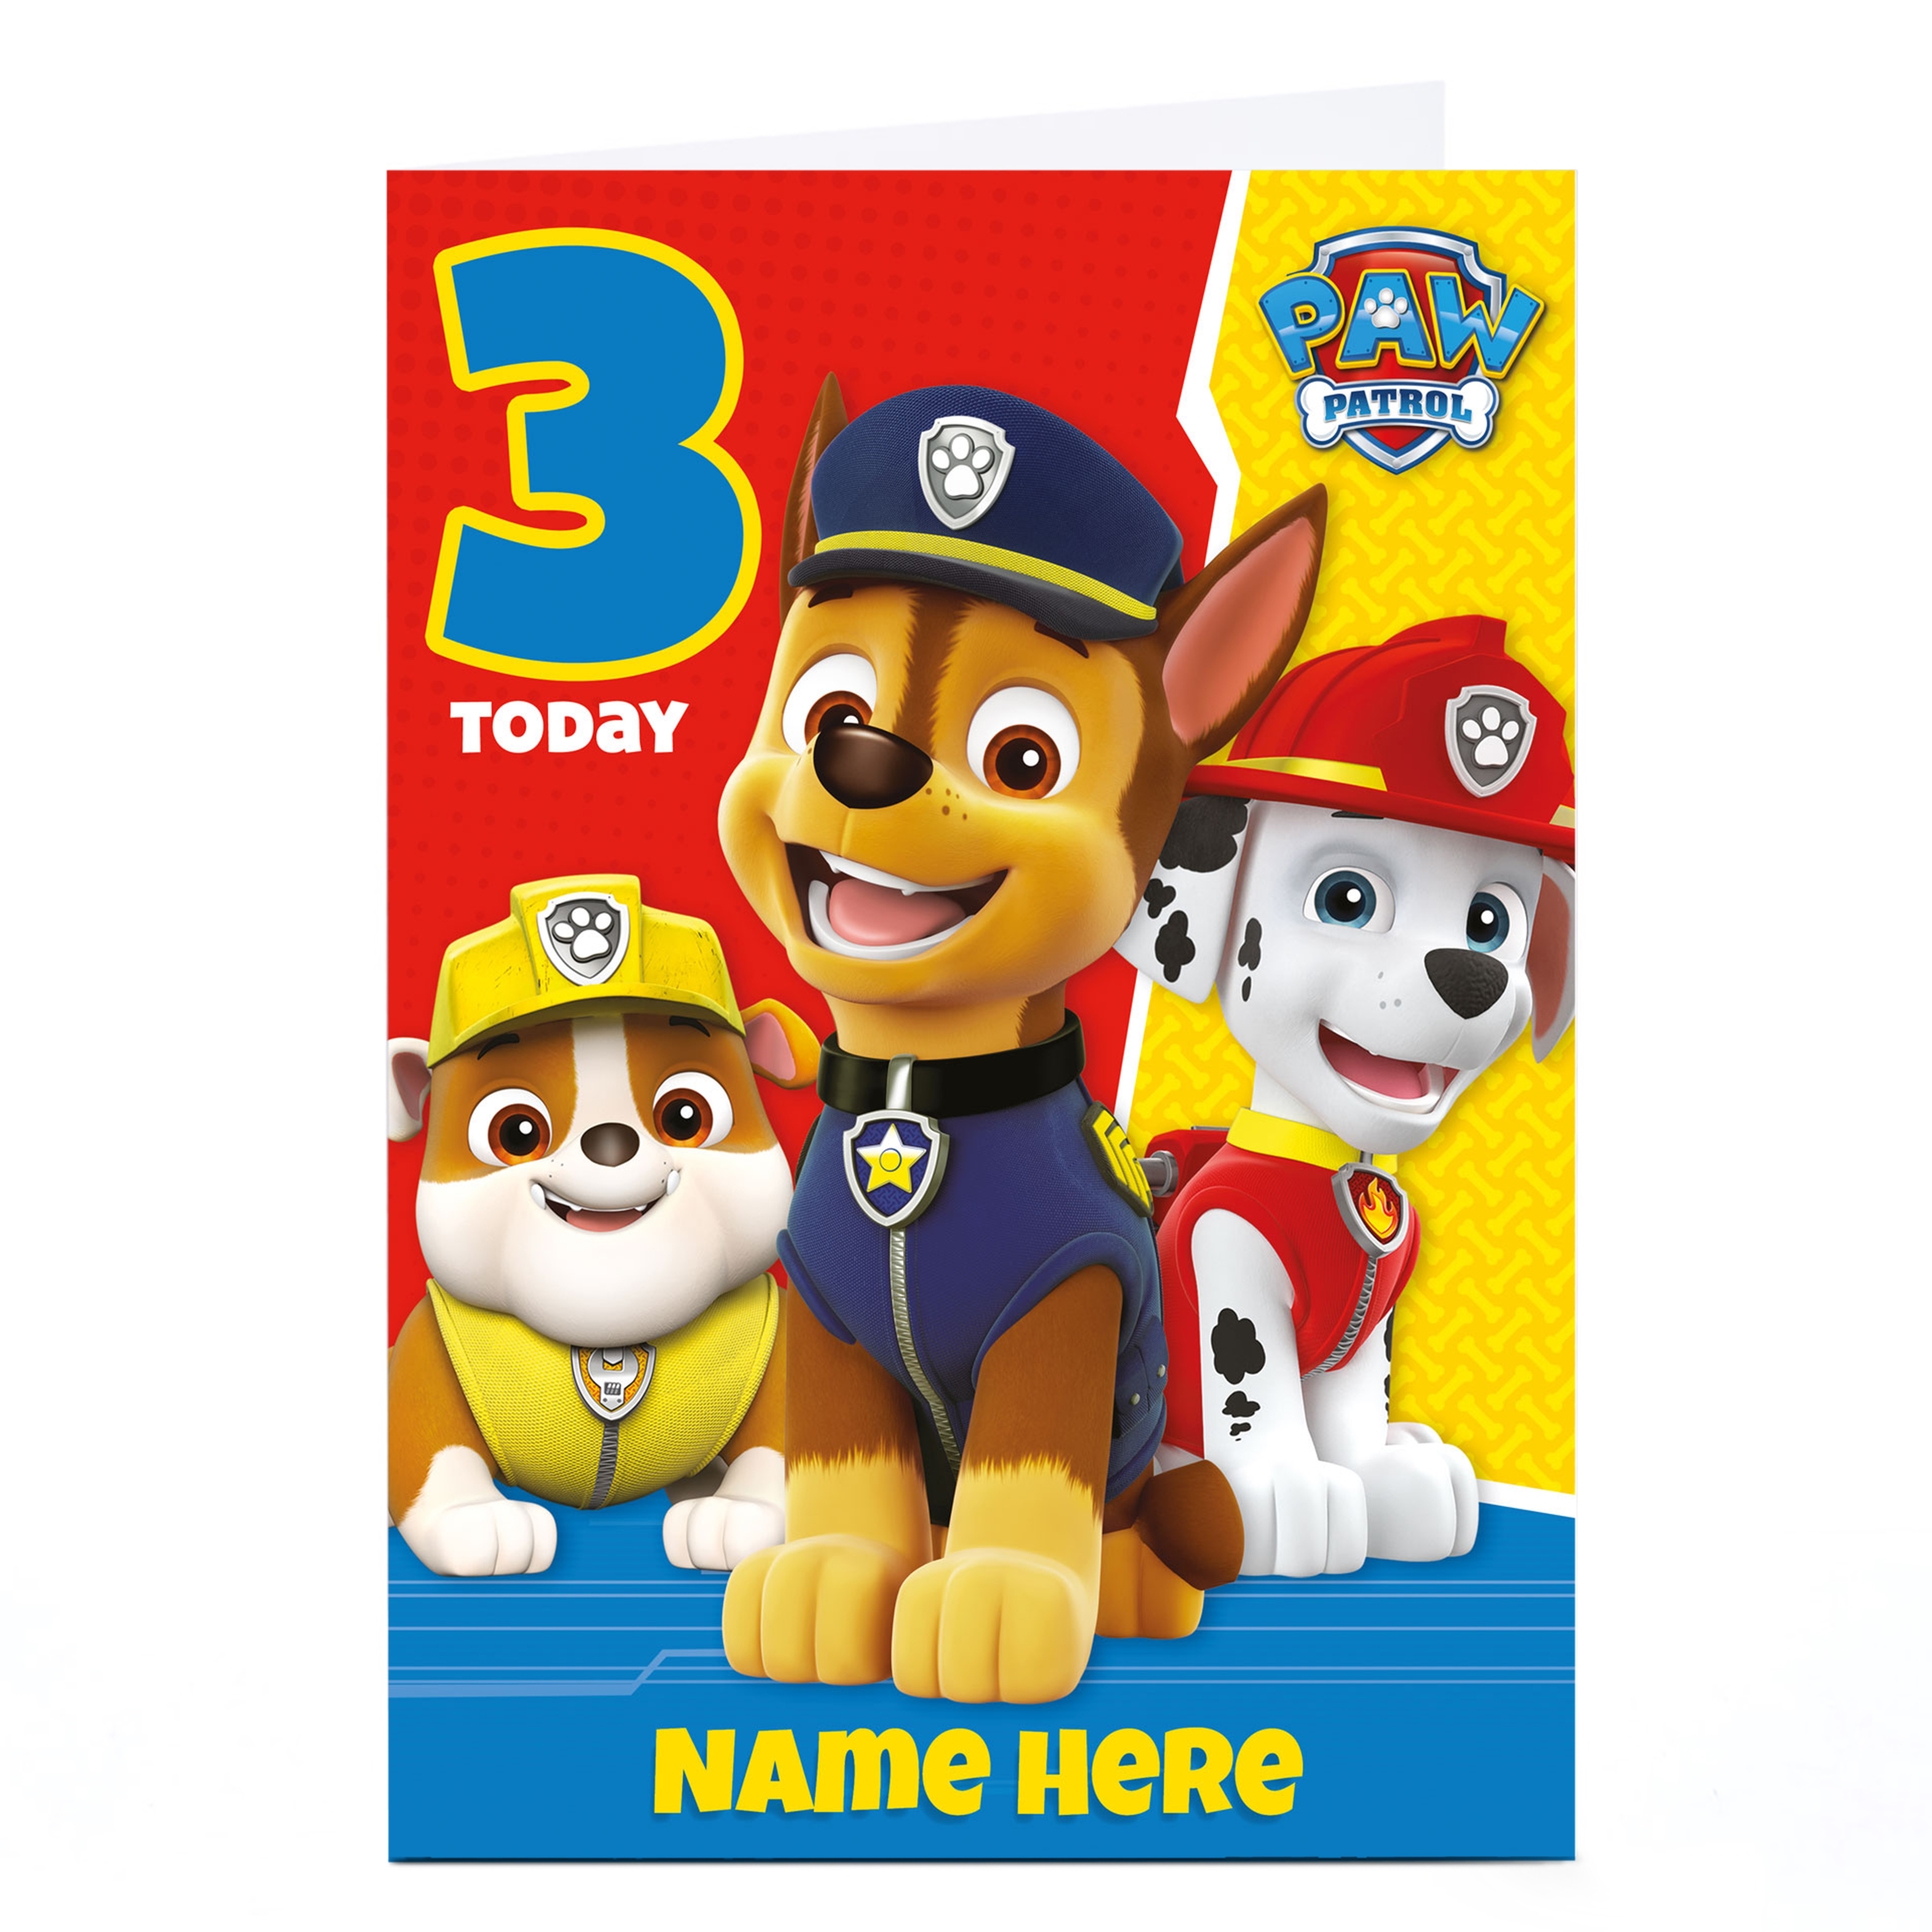 Buy Paw Card - 3 Today for GBP | Card Factory UK